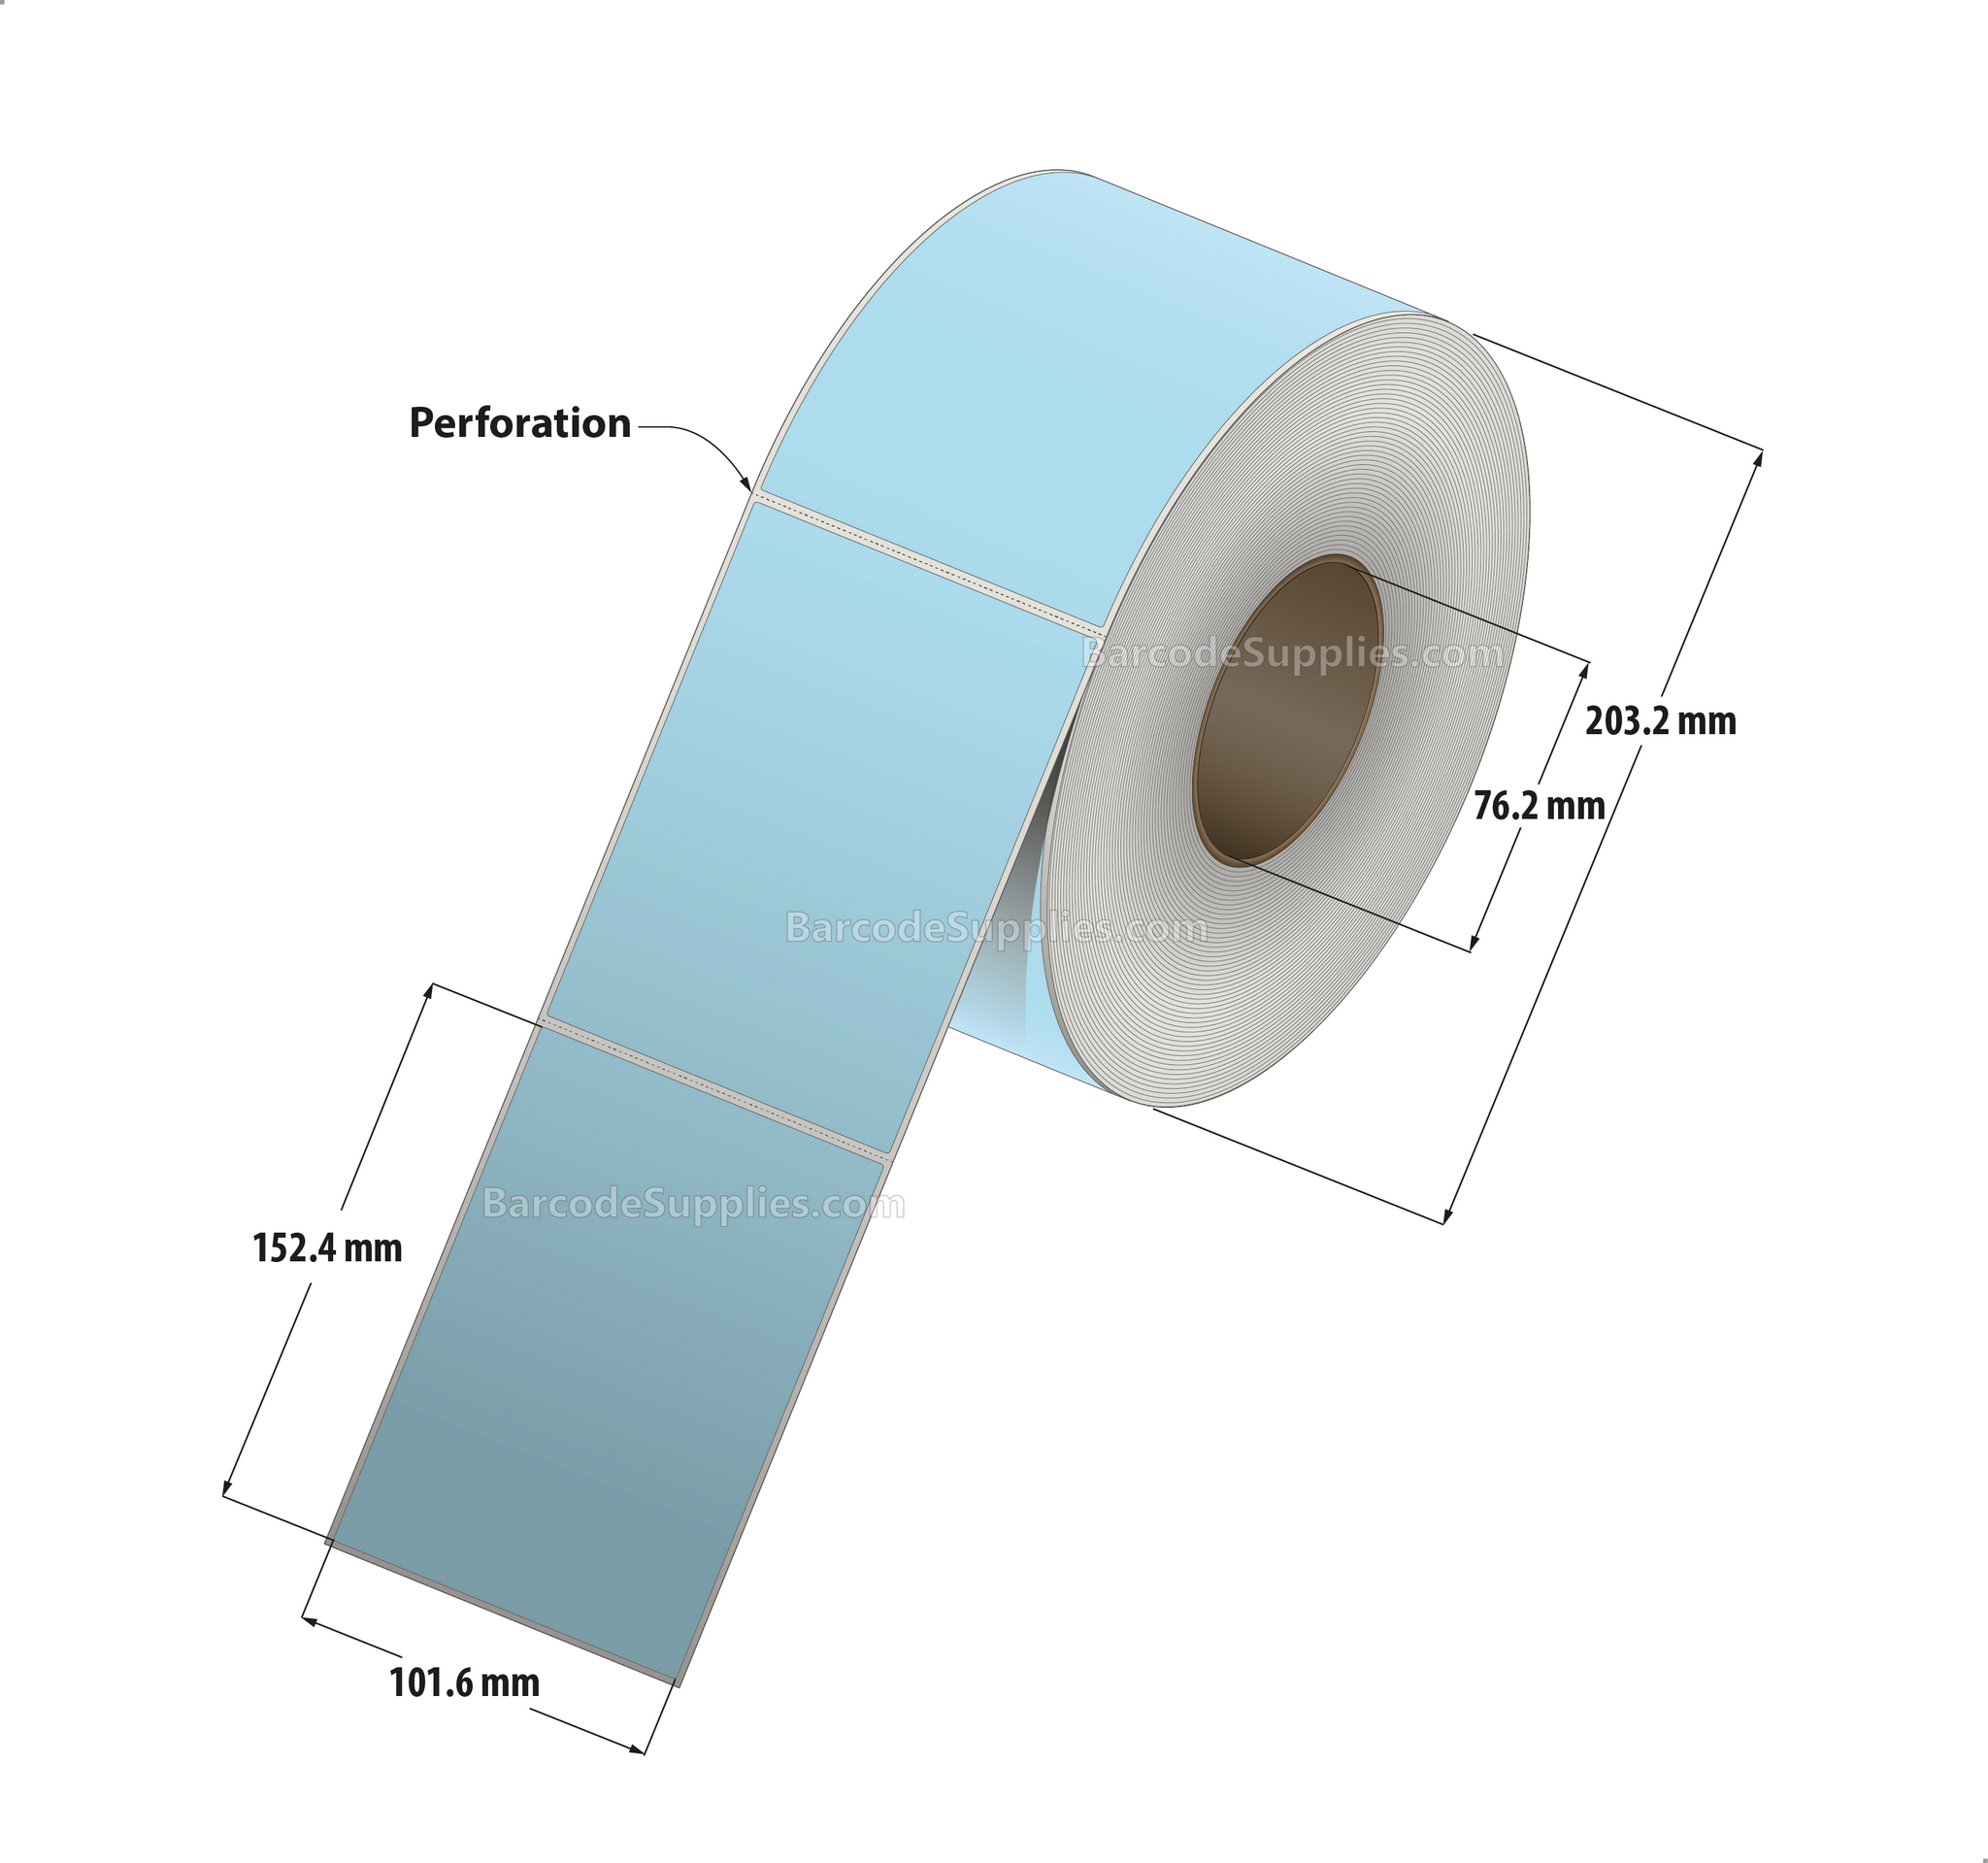 4 x 6 Direct Thermal 2975 Blue Labels With Permanent Acrylic Adhesive - Perforated - 1000 Labels Per Roll - Carton Of 4 Rolls - 4000 Labels Total - MPN: DT46-1PBL